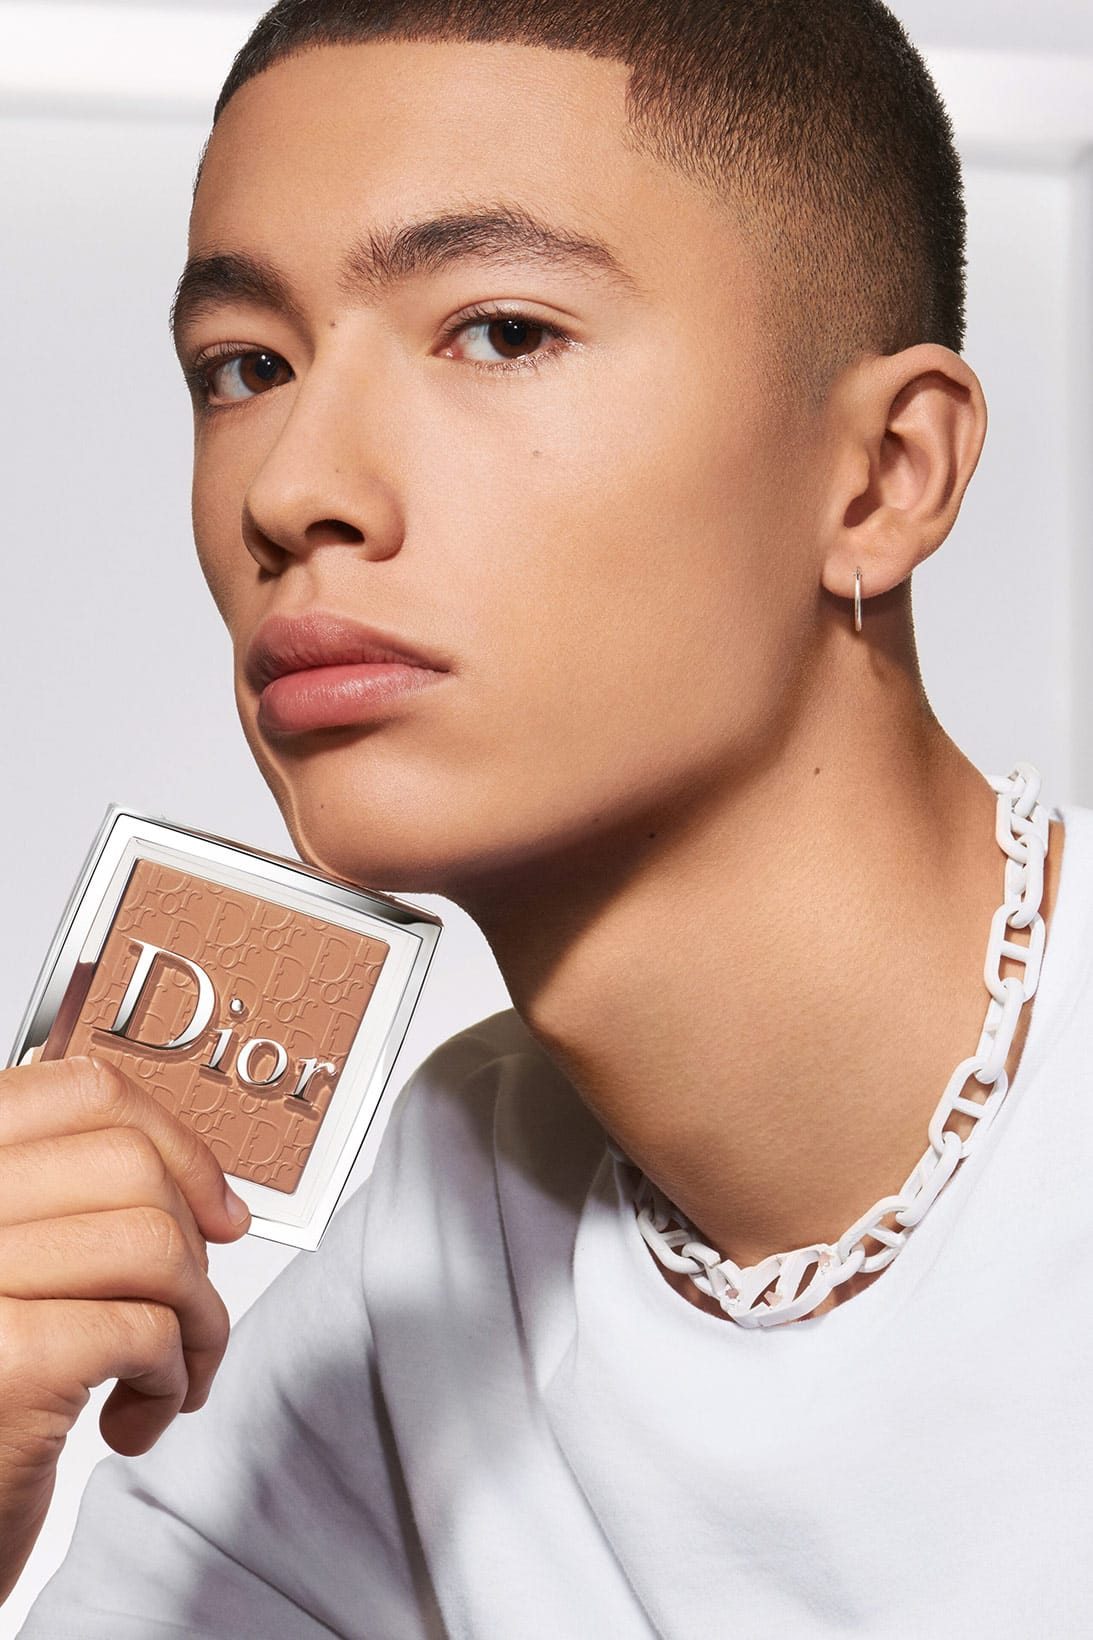 dior makeup face and body foundation